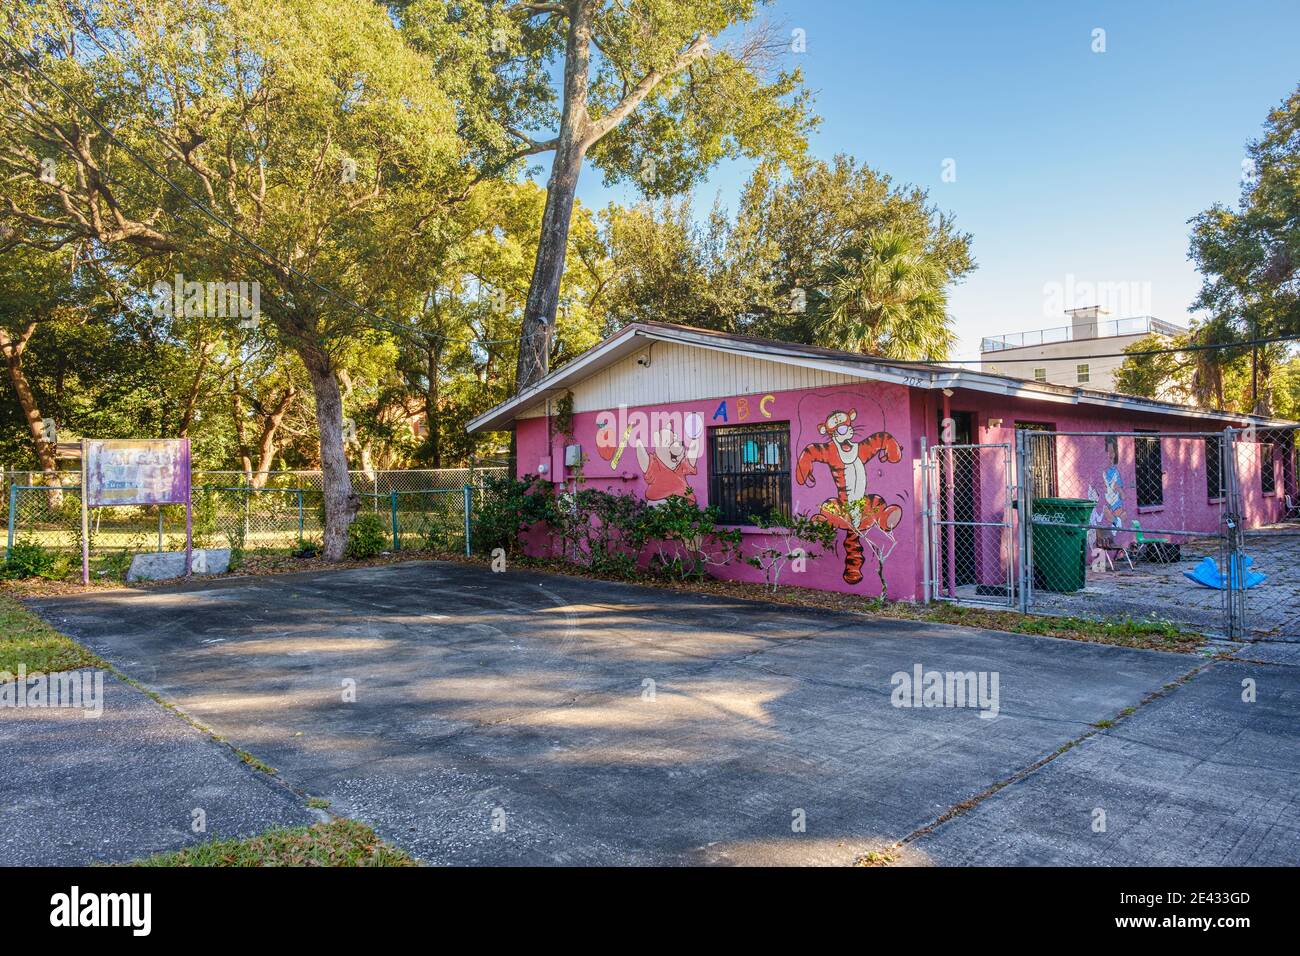 Daycare - Tampa Heights, Tampa, Florida. Tampa's first suburb established in 1883. The Tampa Heights neighborhood has been experiencing gentrification Stock Photo